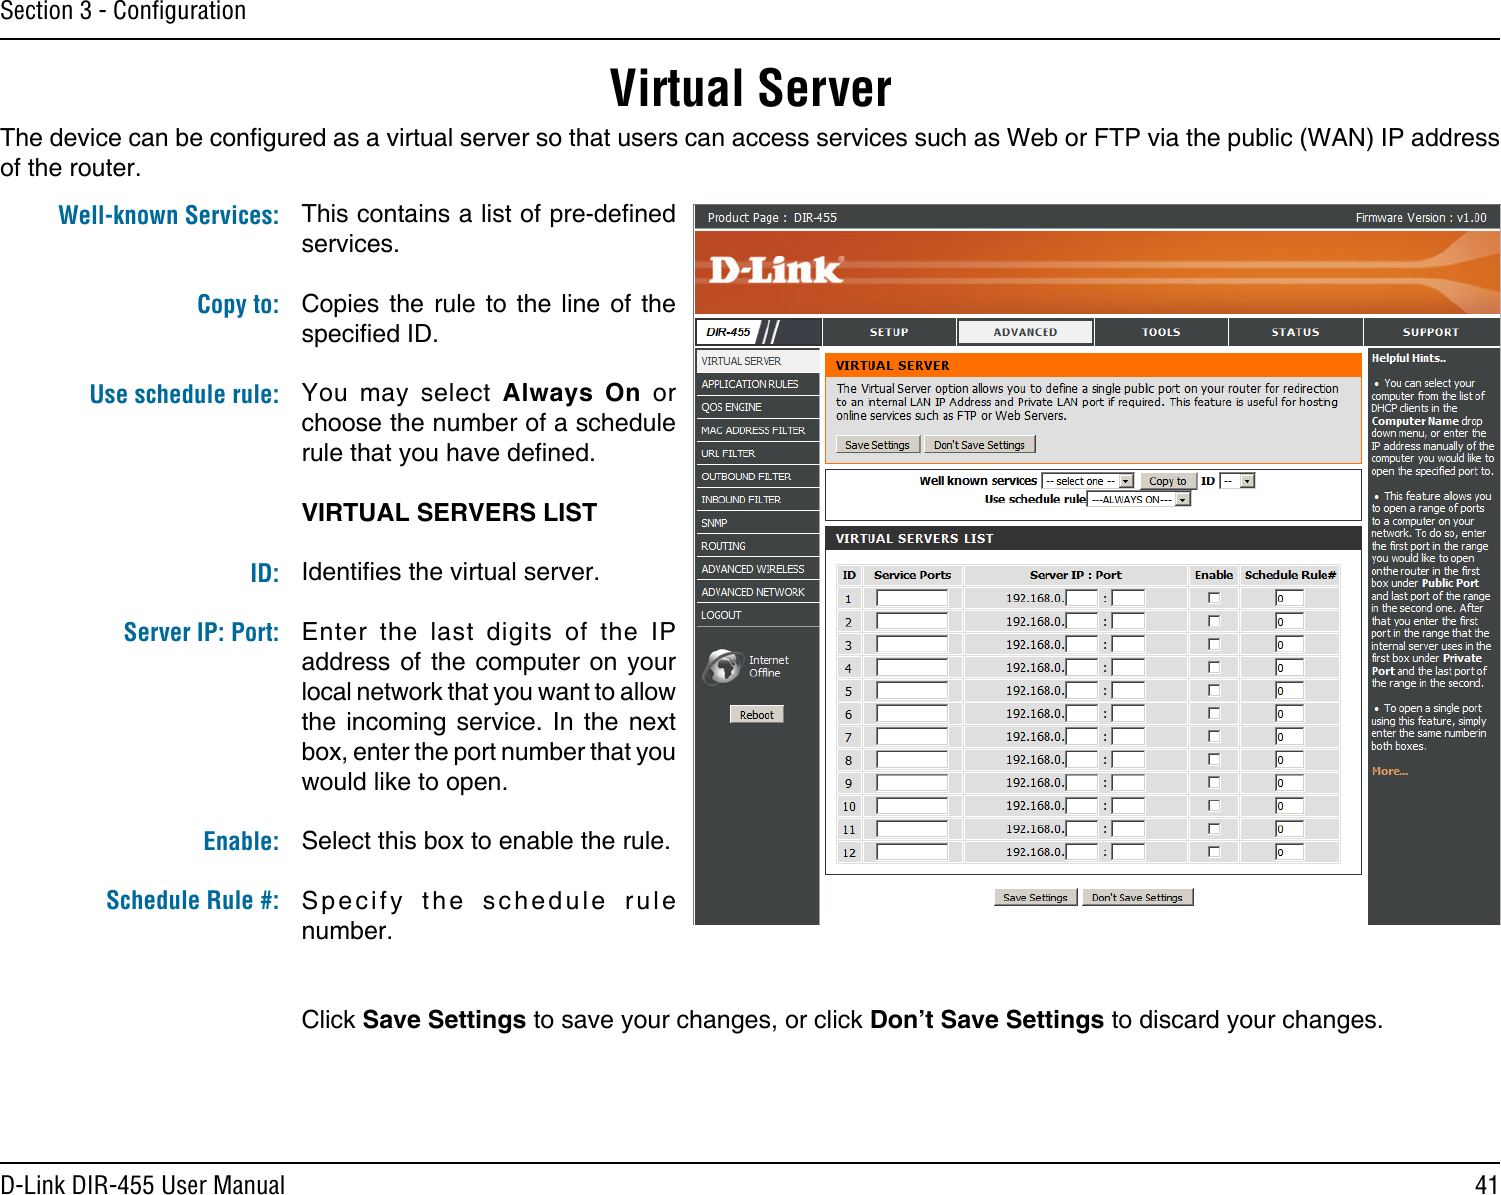 41D-Link DIR-455 User ManualSection 3 - ConﬁgurationVirtual ServerThe device can be congured as a virtual server so that users can access services such as Web or FTP via the public (WAN) IP address of the router. This contains a list of pre-dened services.Copies  the  rule  to the  line  of the specied ID.You  may  select  Always  On  or choose the number of a schedule rule that you have dened.VIRTUAL SERVERS LISTIdenties the virtual server.Enter  the  last  digits  of  the  IP address of  the computer  on your local network that you want to allow the  incoming  service.  In  the  next box, enter the port number that you would like to open.Select this box to enable the rule.Specify  the  schedule  rule number. Click Save Settings to save your changes, or click Don’t Save Settings to discard your changes.Well-known Services: Copy to: Use schedule rule:ID:Server IP: Port: Enable:Schedule Rule #: